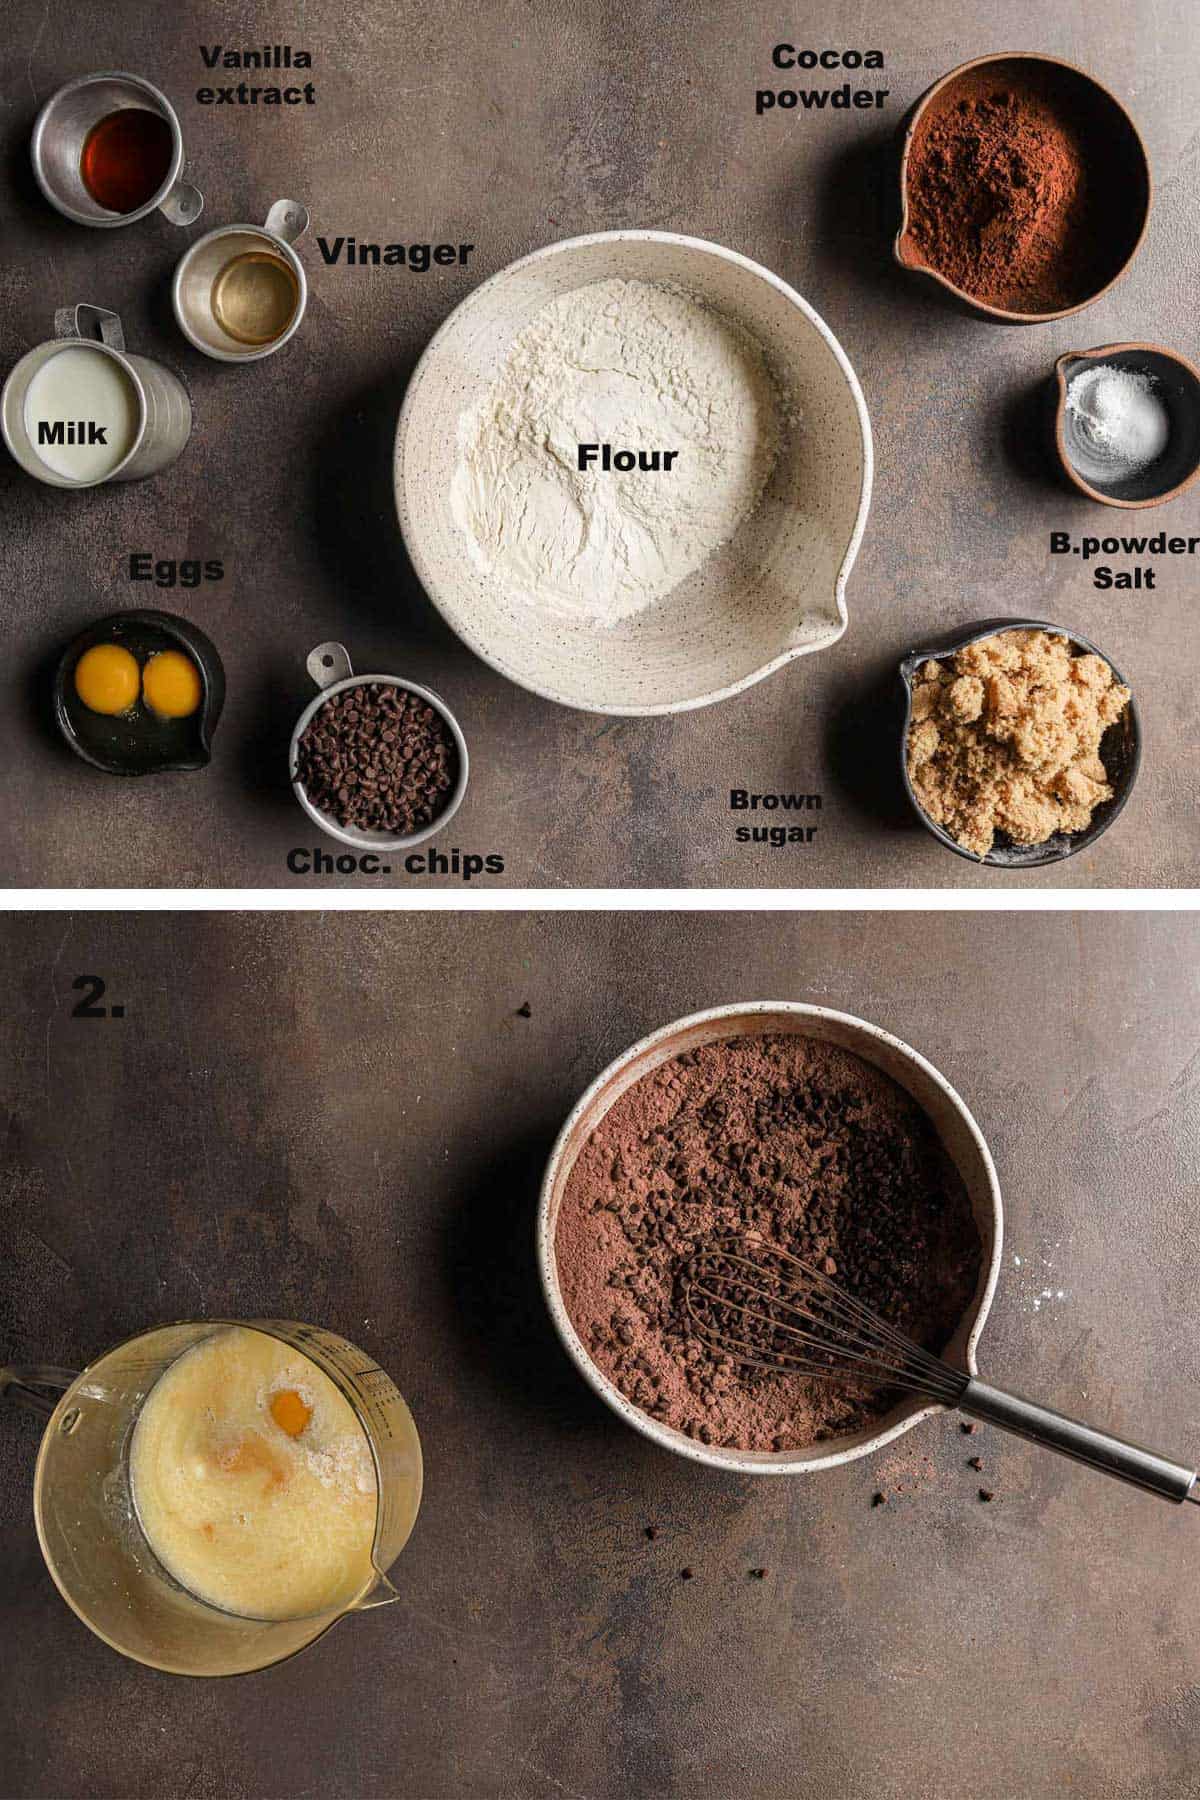 Ingredients and instruction how to make baked chocolate donuts.